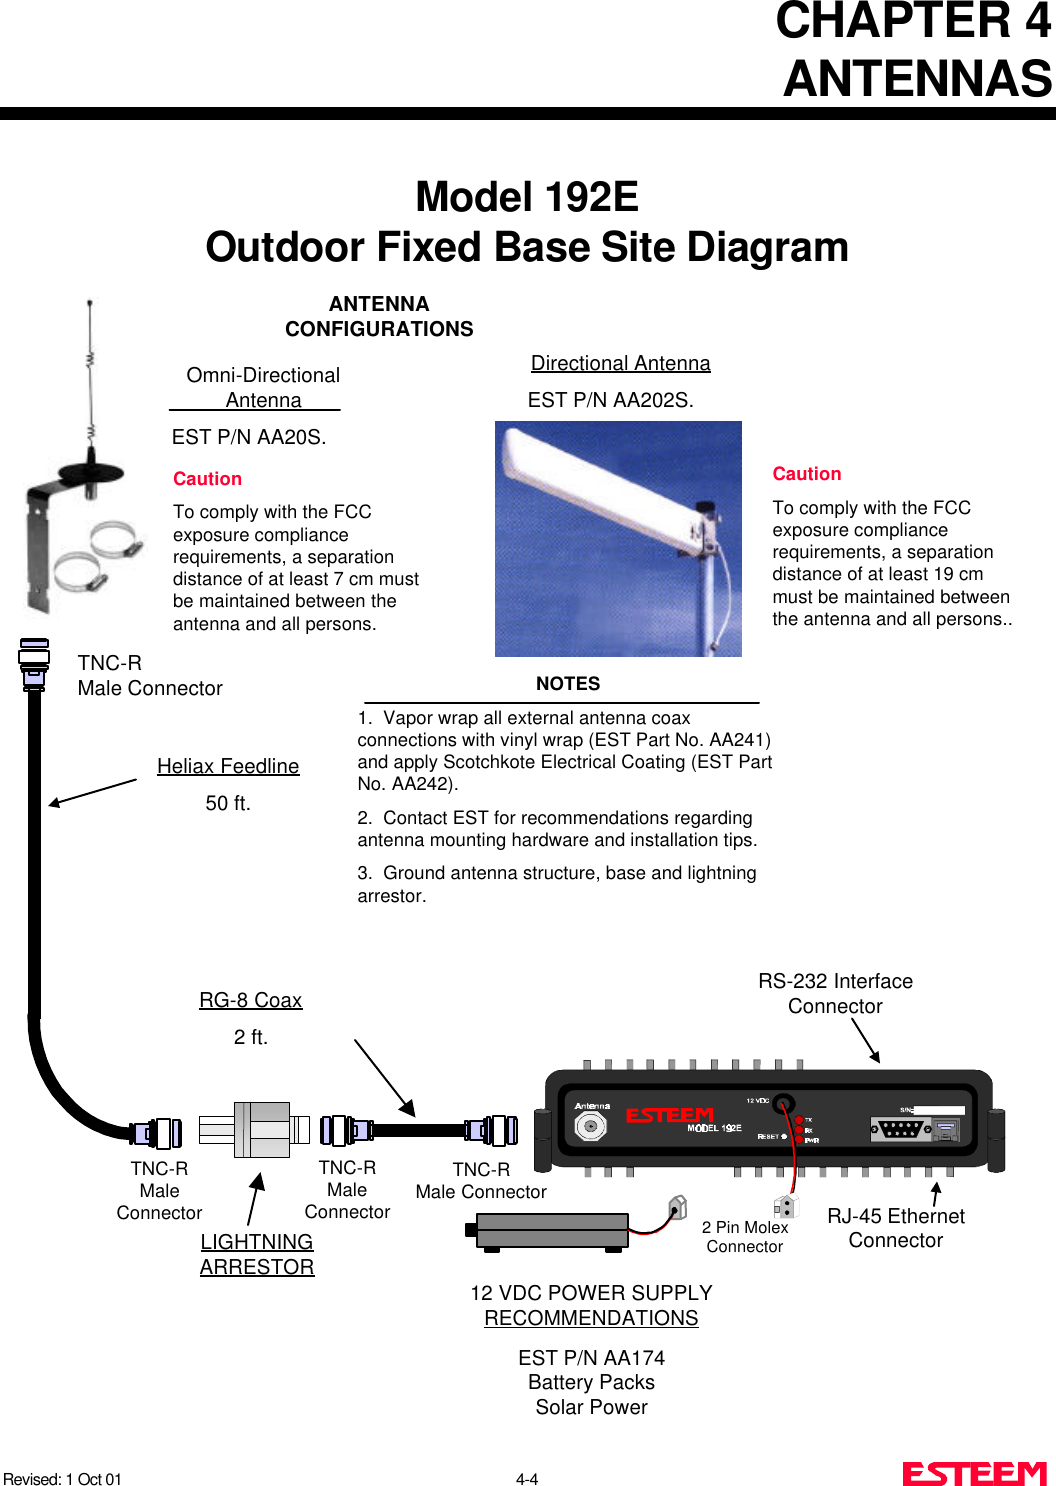 CHAPTER 4ANTENNASRevised: 1 Oct 01 4-4Model 192EOutdoor Fixed Base Site DiagramANTENNACONFIGURATIONSHeliax Feedline50 ft.TNC-RMale ConnectorLIGHTNINGARRESTOR12 VDC POWER SUPPLYRECOMMENDATIONSEST P/N AA174Battery PacksSolar Power2 Pin MolexConnectorRG-8 Coax2 ft.RS-232 InterfaceConnectorDirectional AntennaEST P/N AA202S.Omni-DirectionalAntennaEST P/N AA20S.CautionTo comply with the FCCexposure compliancerequirements, a separationdistance of at least 7 cm mustbe maintained between theantenna and all persons.CautionTo comply with the FCCexposure compliancerequirements, a separationdistance of at least 19 cmmust be maintained betweenthe antenna and all persons..RJ-45 EthernetConnectorNOTES1.  Vapor wrap all external antenna coaxconnections with vinyl wrap (EST Part No. AA241)and apply Scotchkote Electrical Coating (EST PartNo. AA242).2.  Contact EST for recommendations regardingantenna mounting hardware and installation tips.3.  Ground antenna structure, base and lightningarrestor.TNC-RMale ConnectorTNC-RMaleConnectorTNC-RMaleConnector